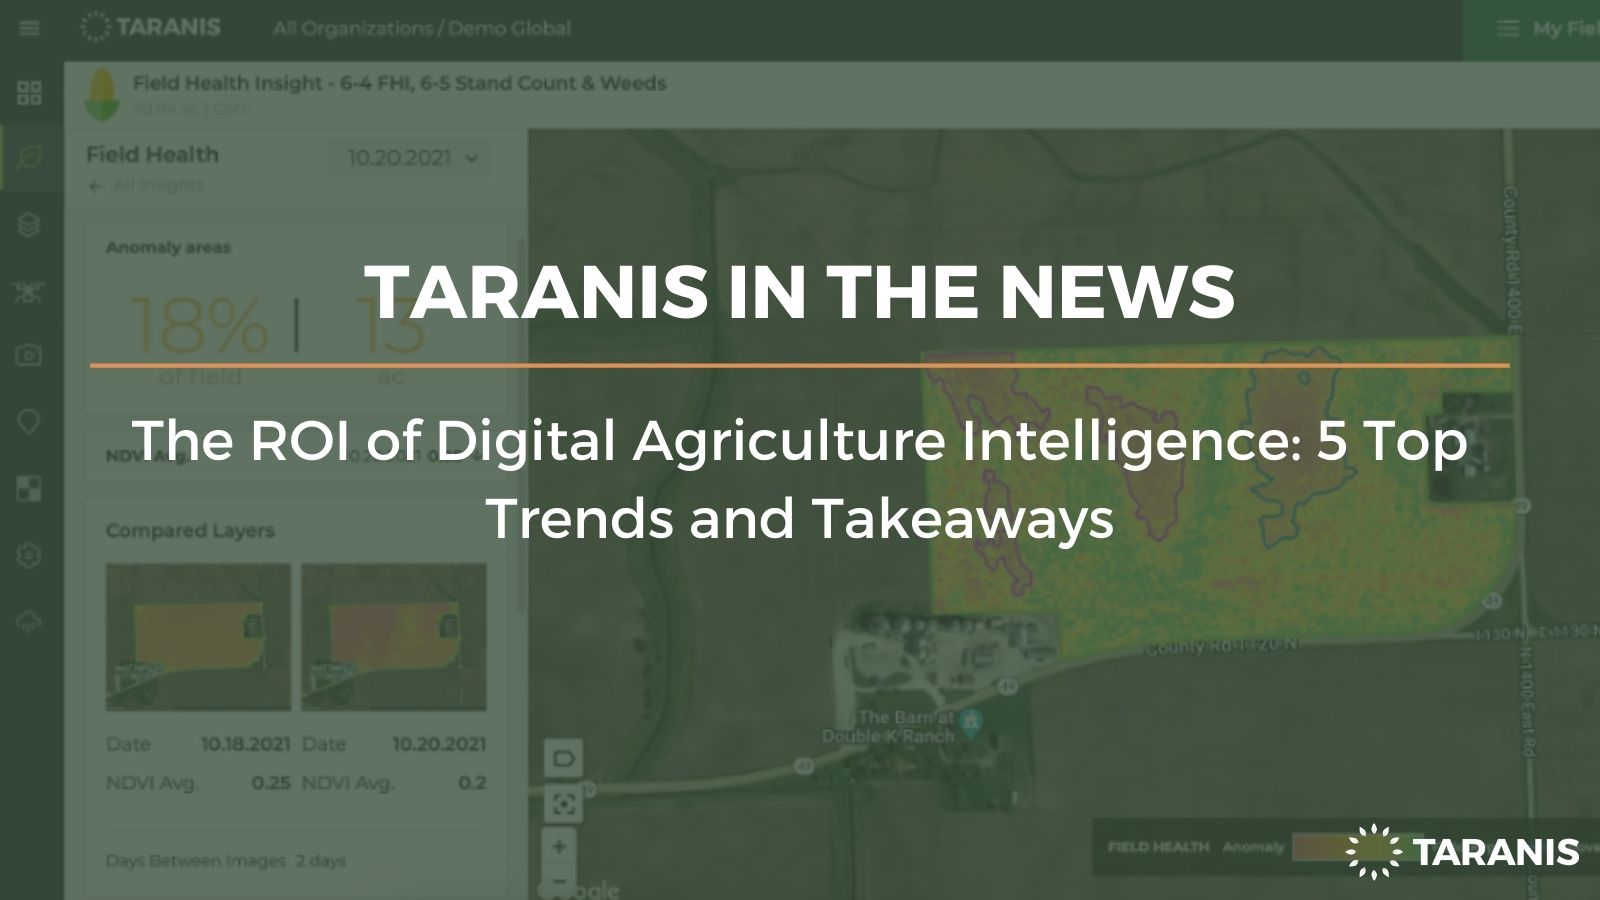 Taranis in the News - The ROI of Digital Agriculture Intelligence: 5 Top Trends and Takeaways